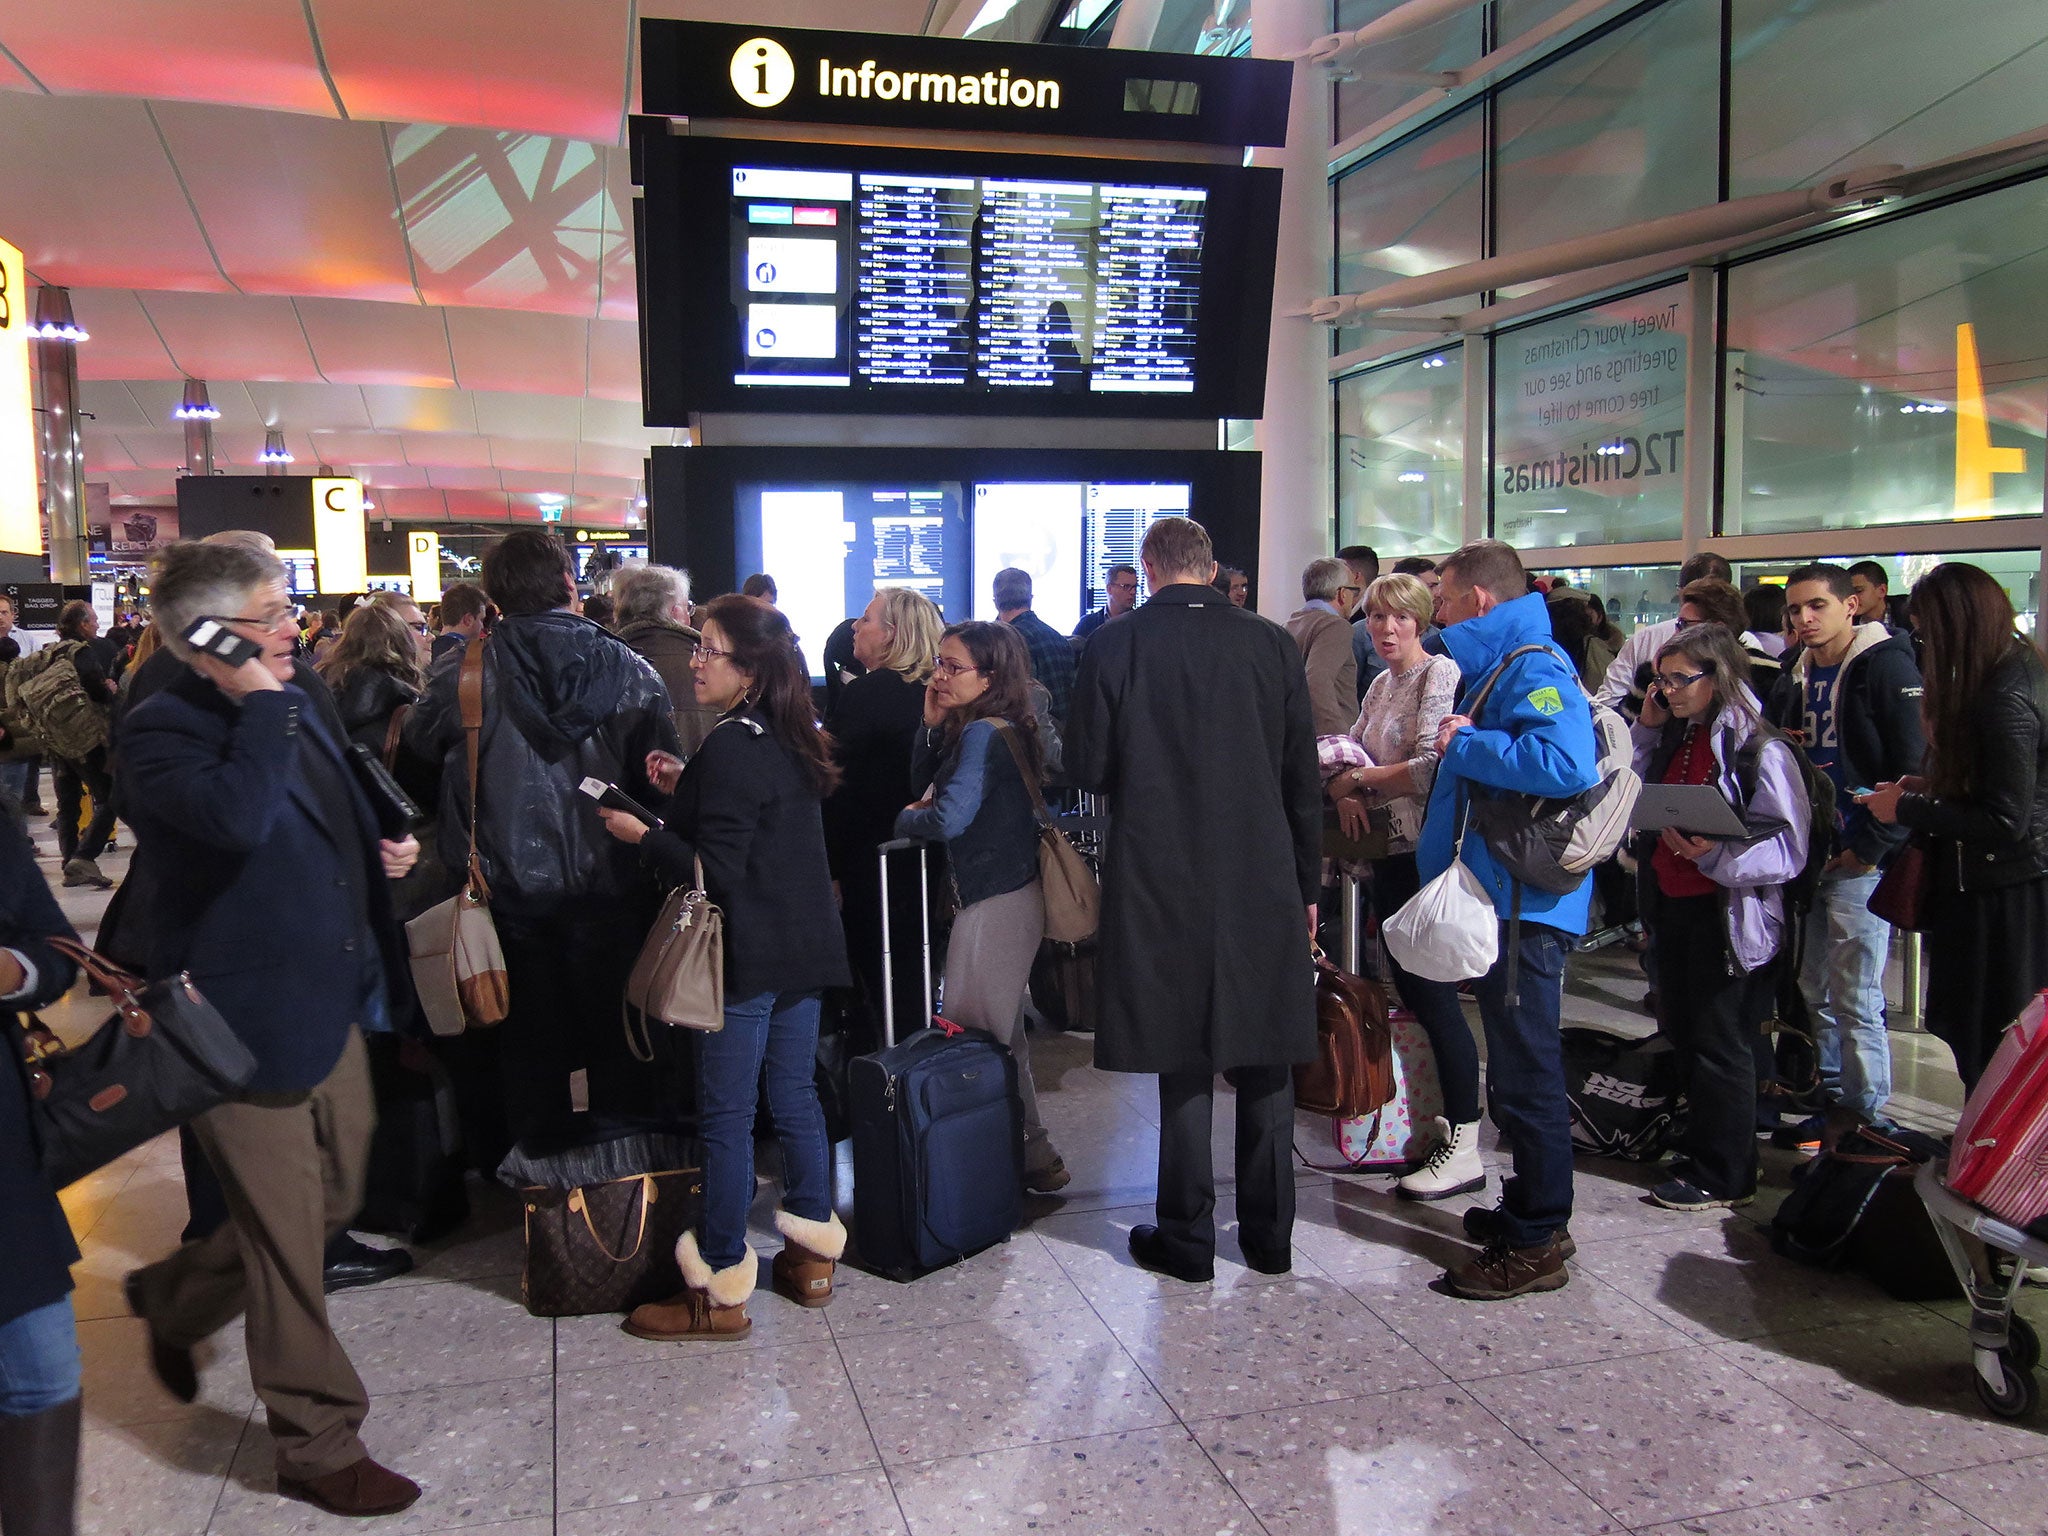 Passengers at Heathrow when a computer glitch caused mass cancellations